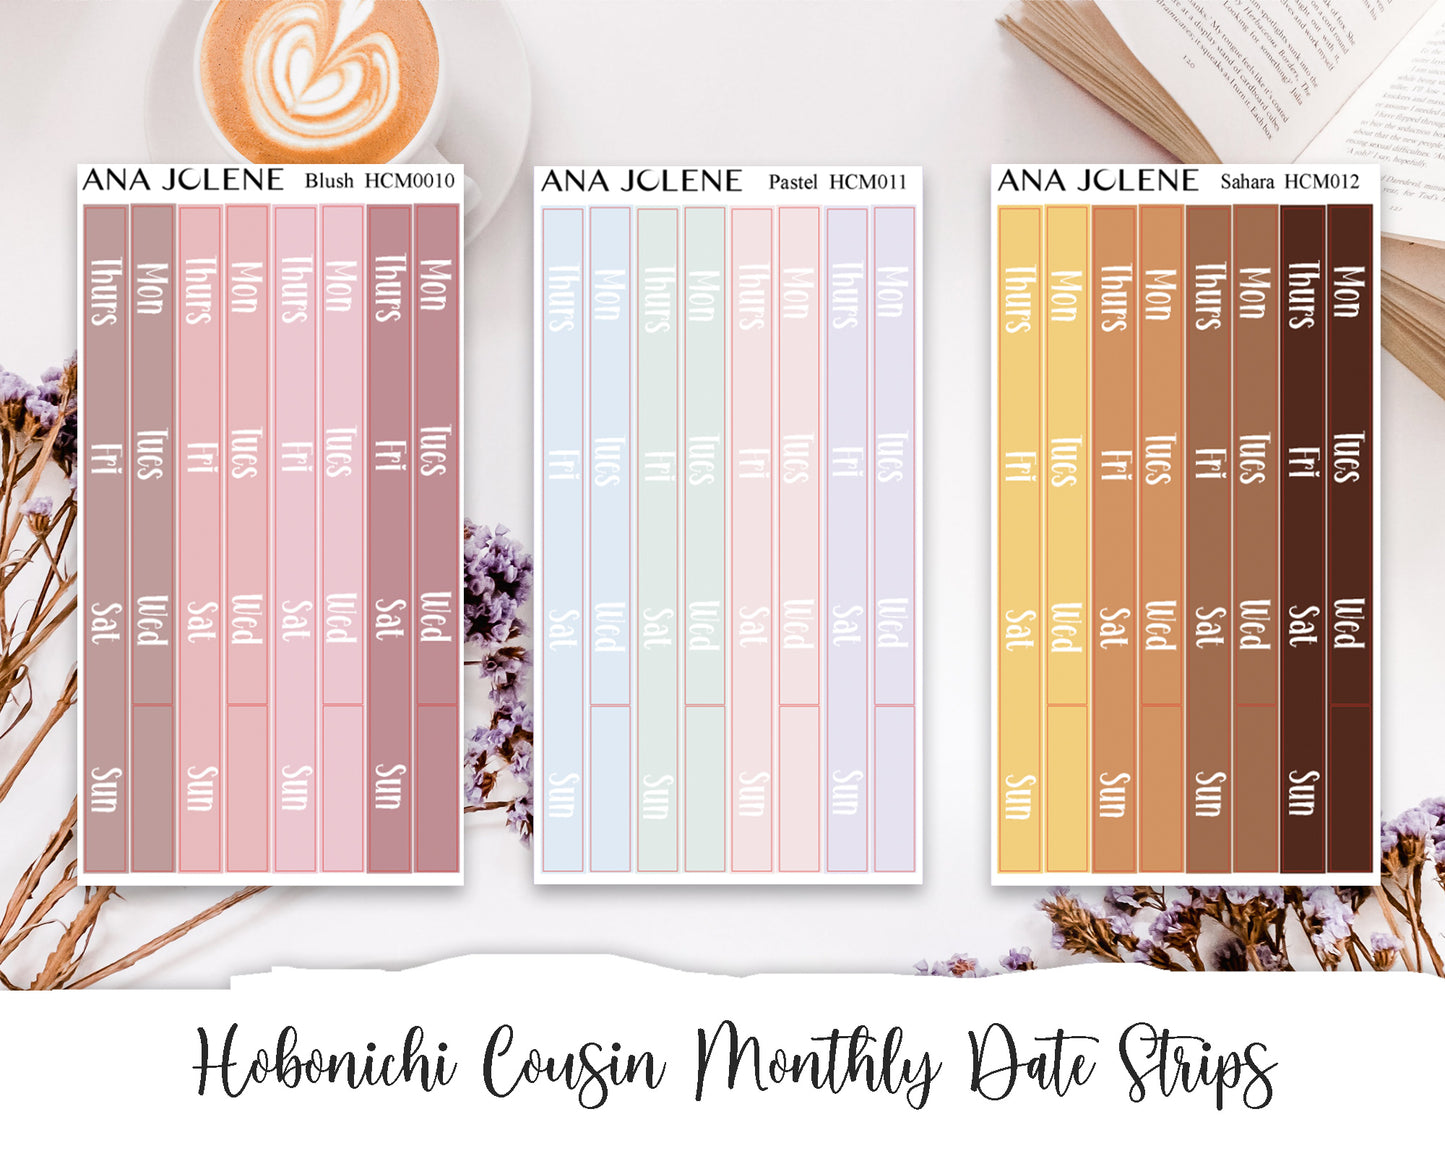 Hobonichi Cousin Monthly Date Strips